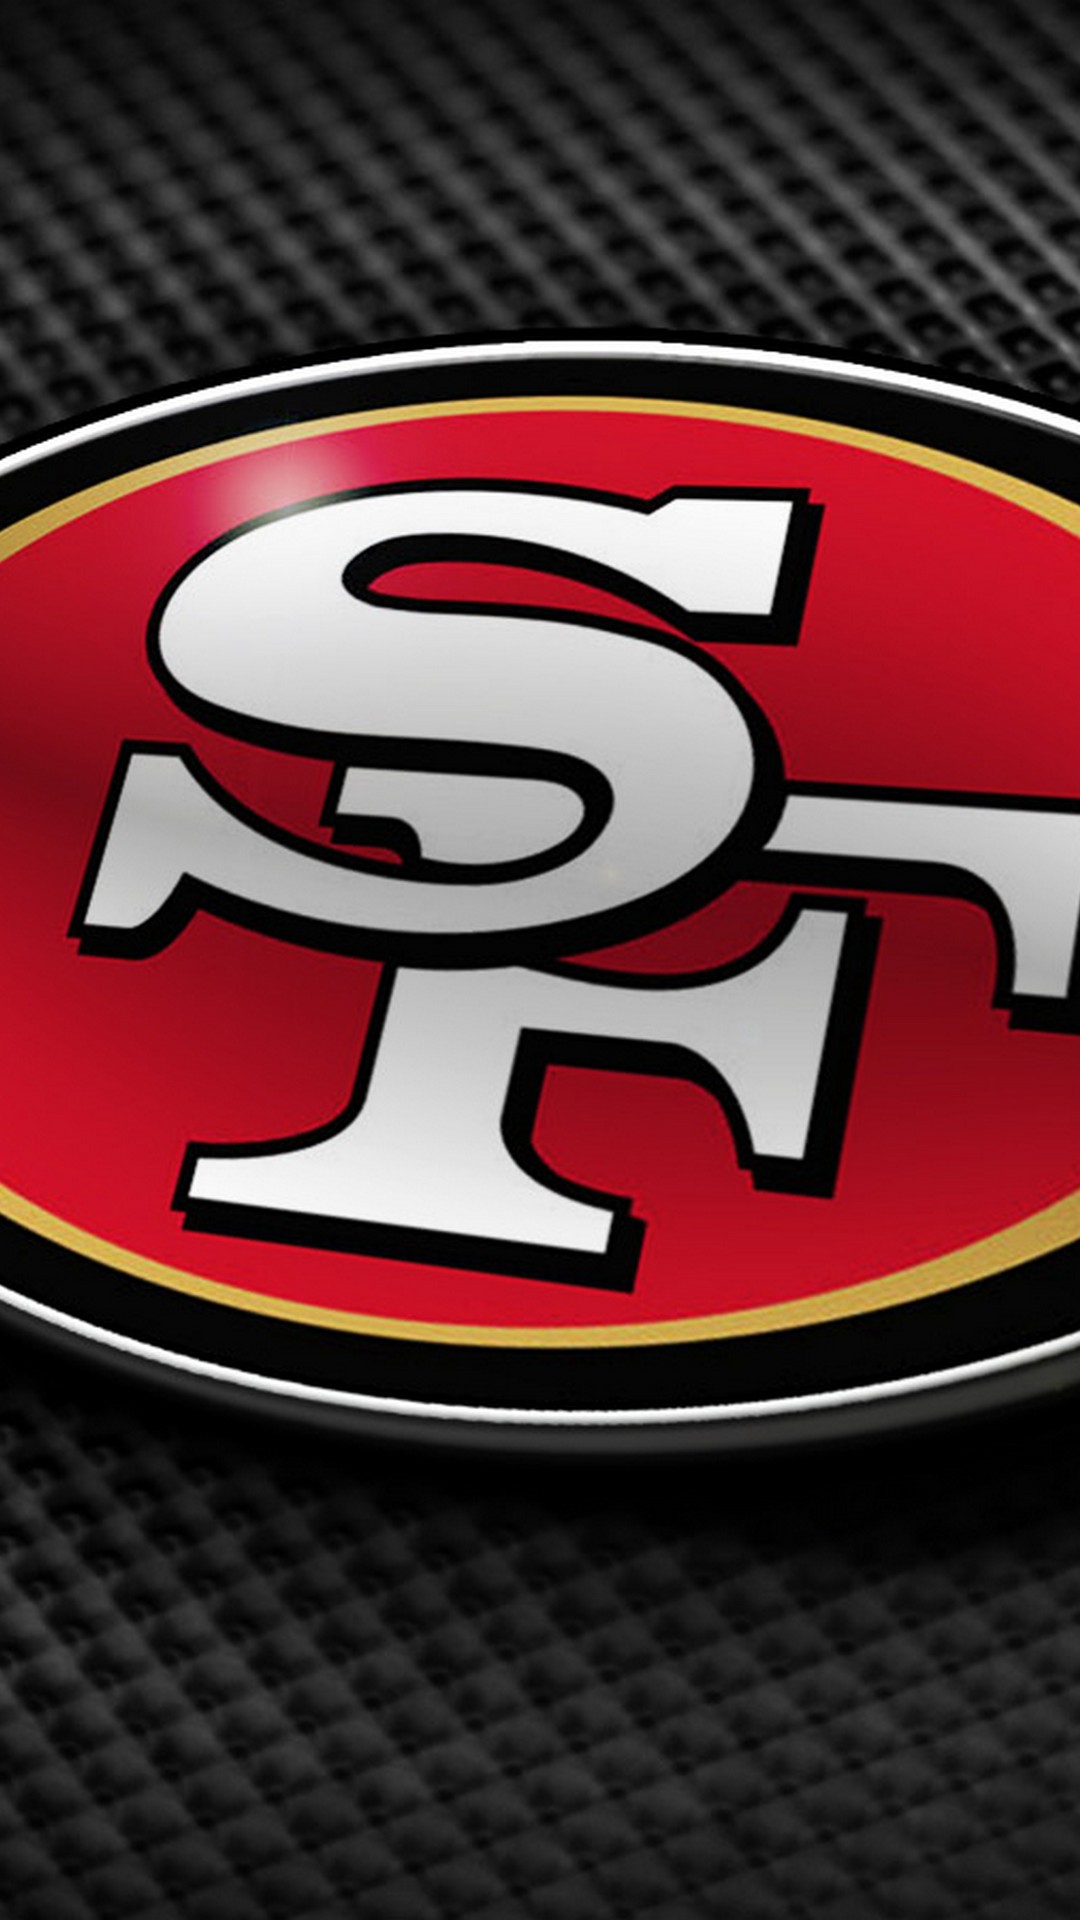 San Francisco 49ers NFL iPhone Wallpaper High Quality With high-resolution 1080X1920 pixel. Donwload and set as wallpaper for your iPhone X, iPhone XS home screen backgrounds, XS Max, XR, iPhone8 lock screen wallpaper, iPhone 7, 6, SE, and other mobile devices